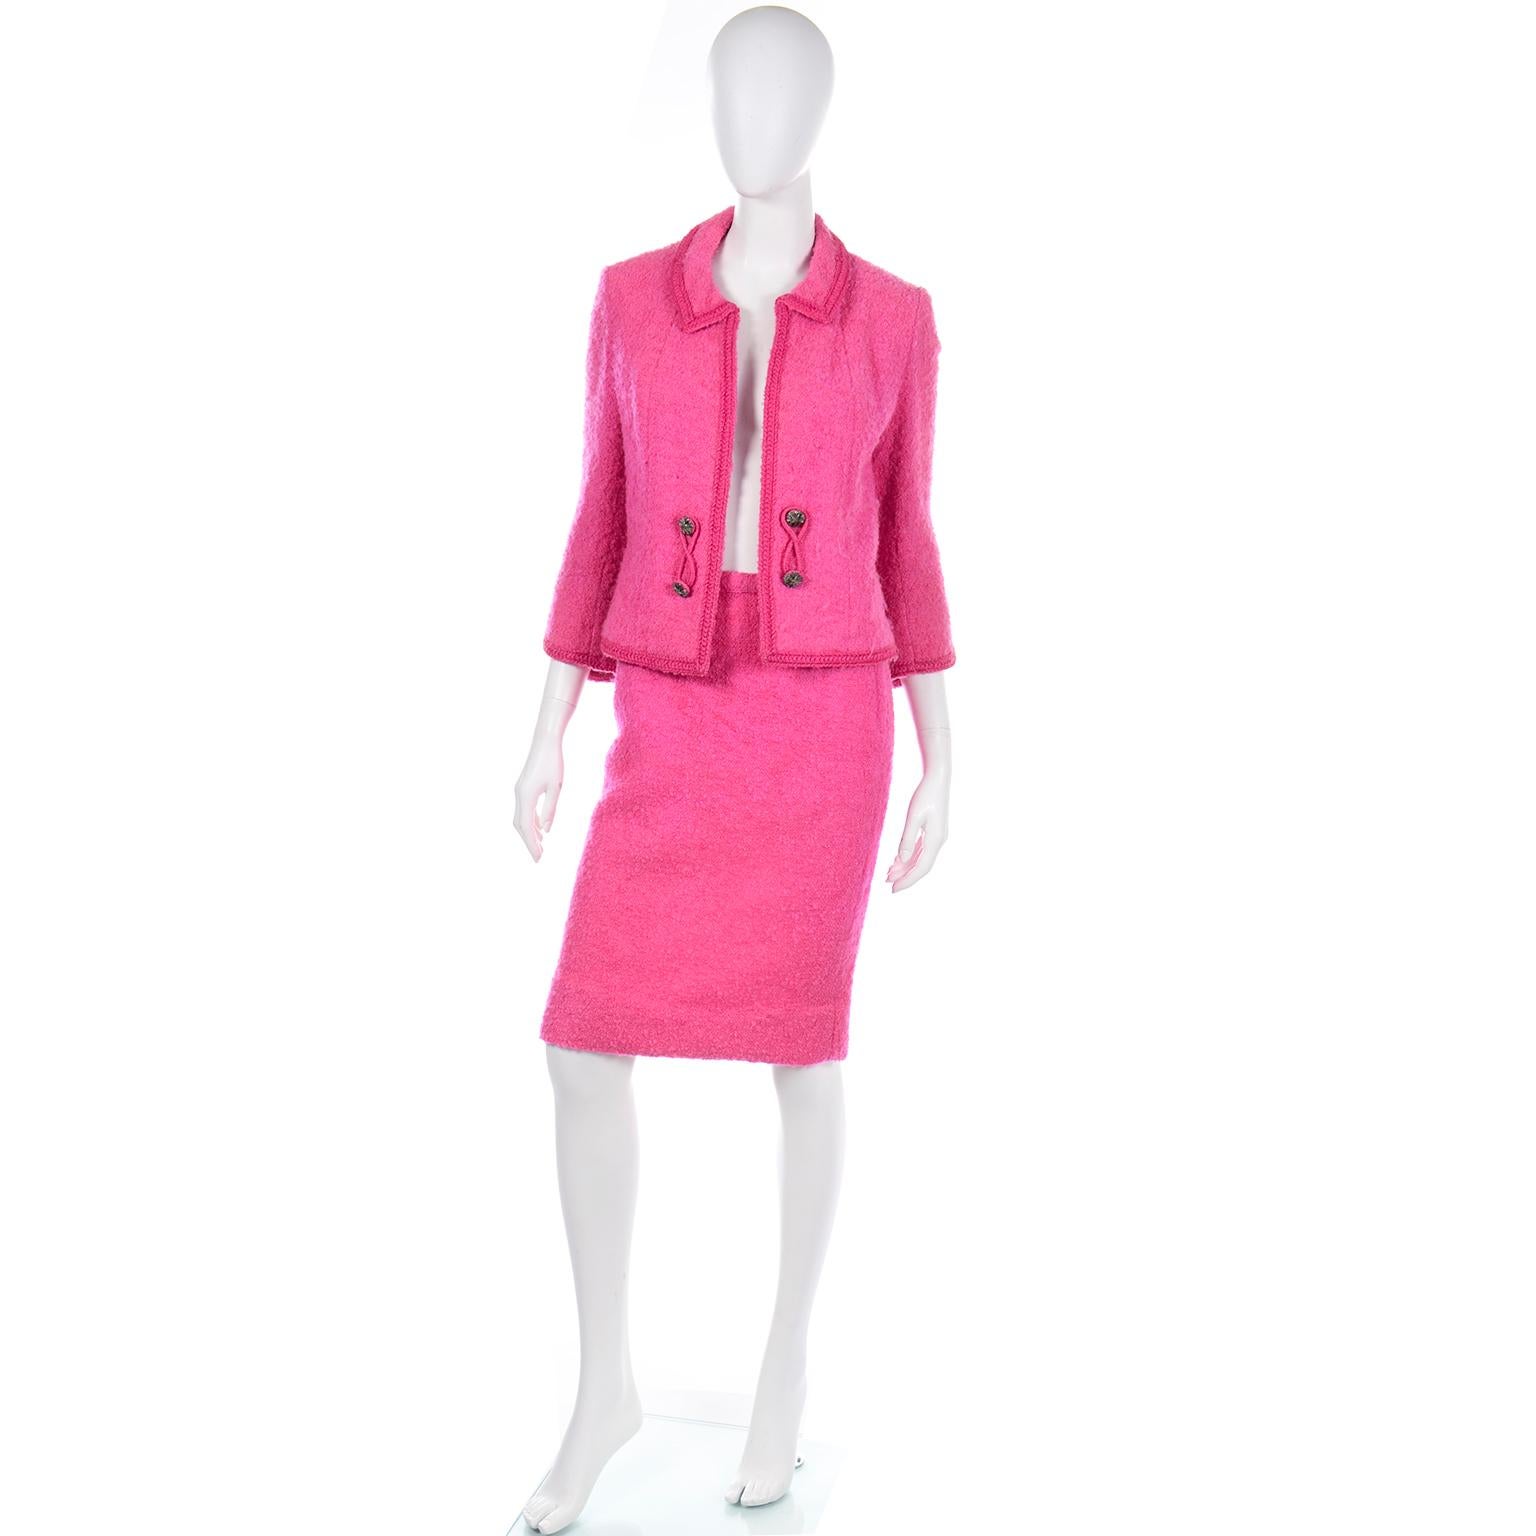 We think this hot pink Lilli Ann skirt suit is reminiscent of Chanel and we fell in love with it instantly! This 2 piece suit includes an open front  fully lined jacket with decorative buttons  and a chain at the hem for weight, and partially lined